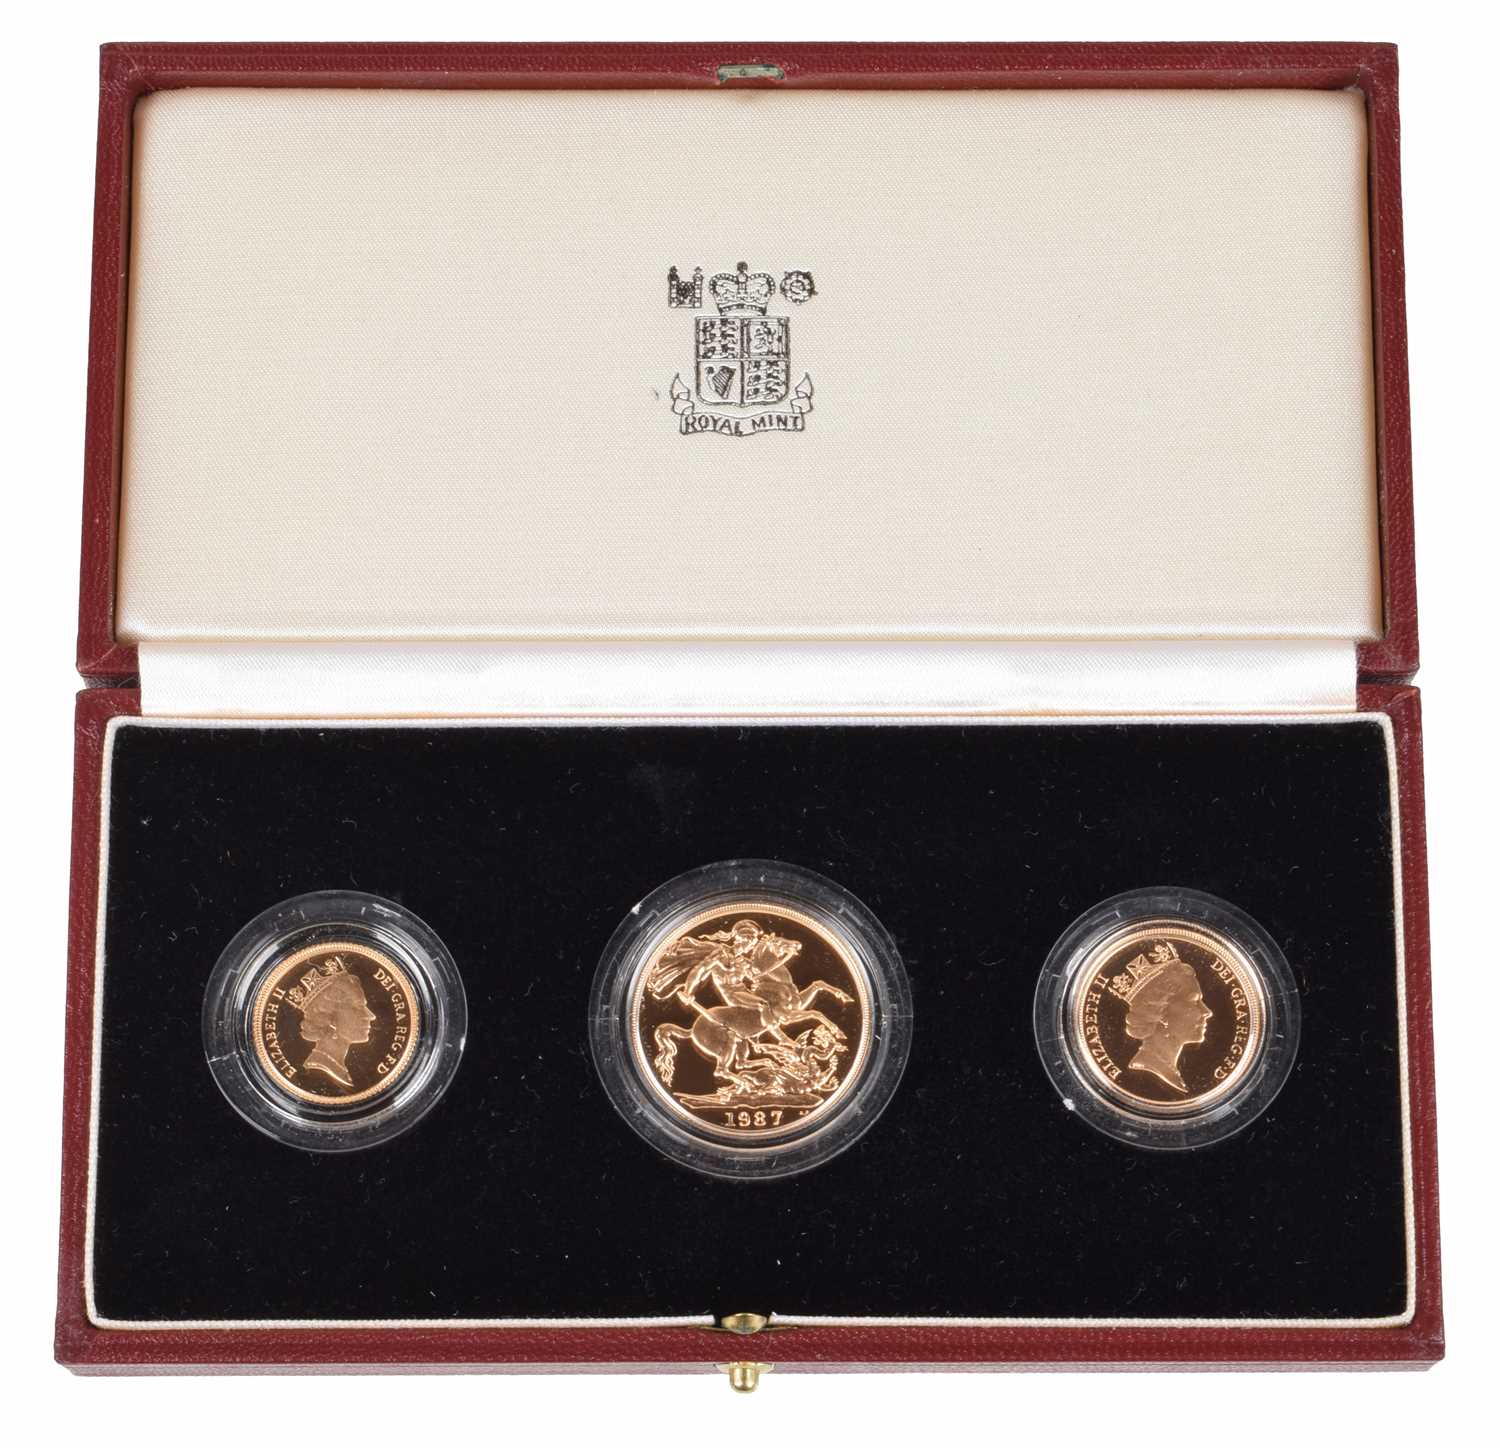 Lot Elizabeth II, United Kingdom, 1987, Gold Proof Three Coin Collection, Royal Mint.